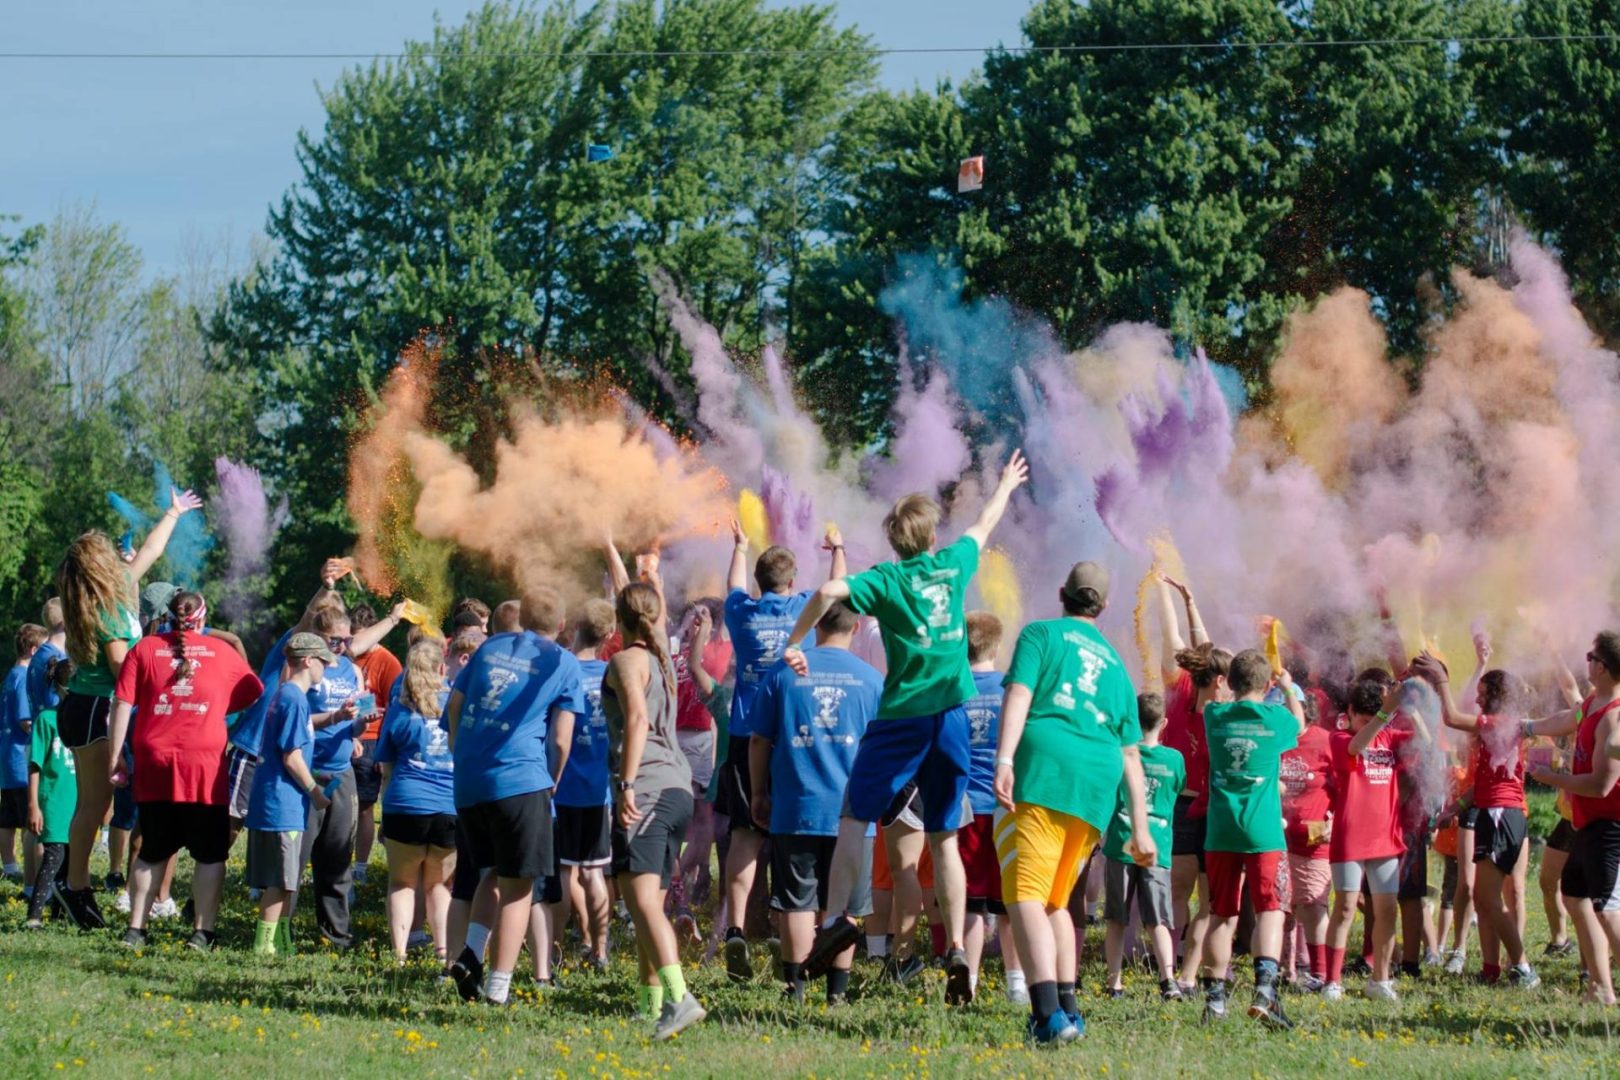 Camp Abilities Brockport Athletes and Coaches celebrating with color bust. Large group of athletes wearing blue, green and red camp tshirts throwing orange, purple and blue dust in the air.